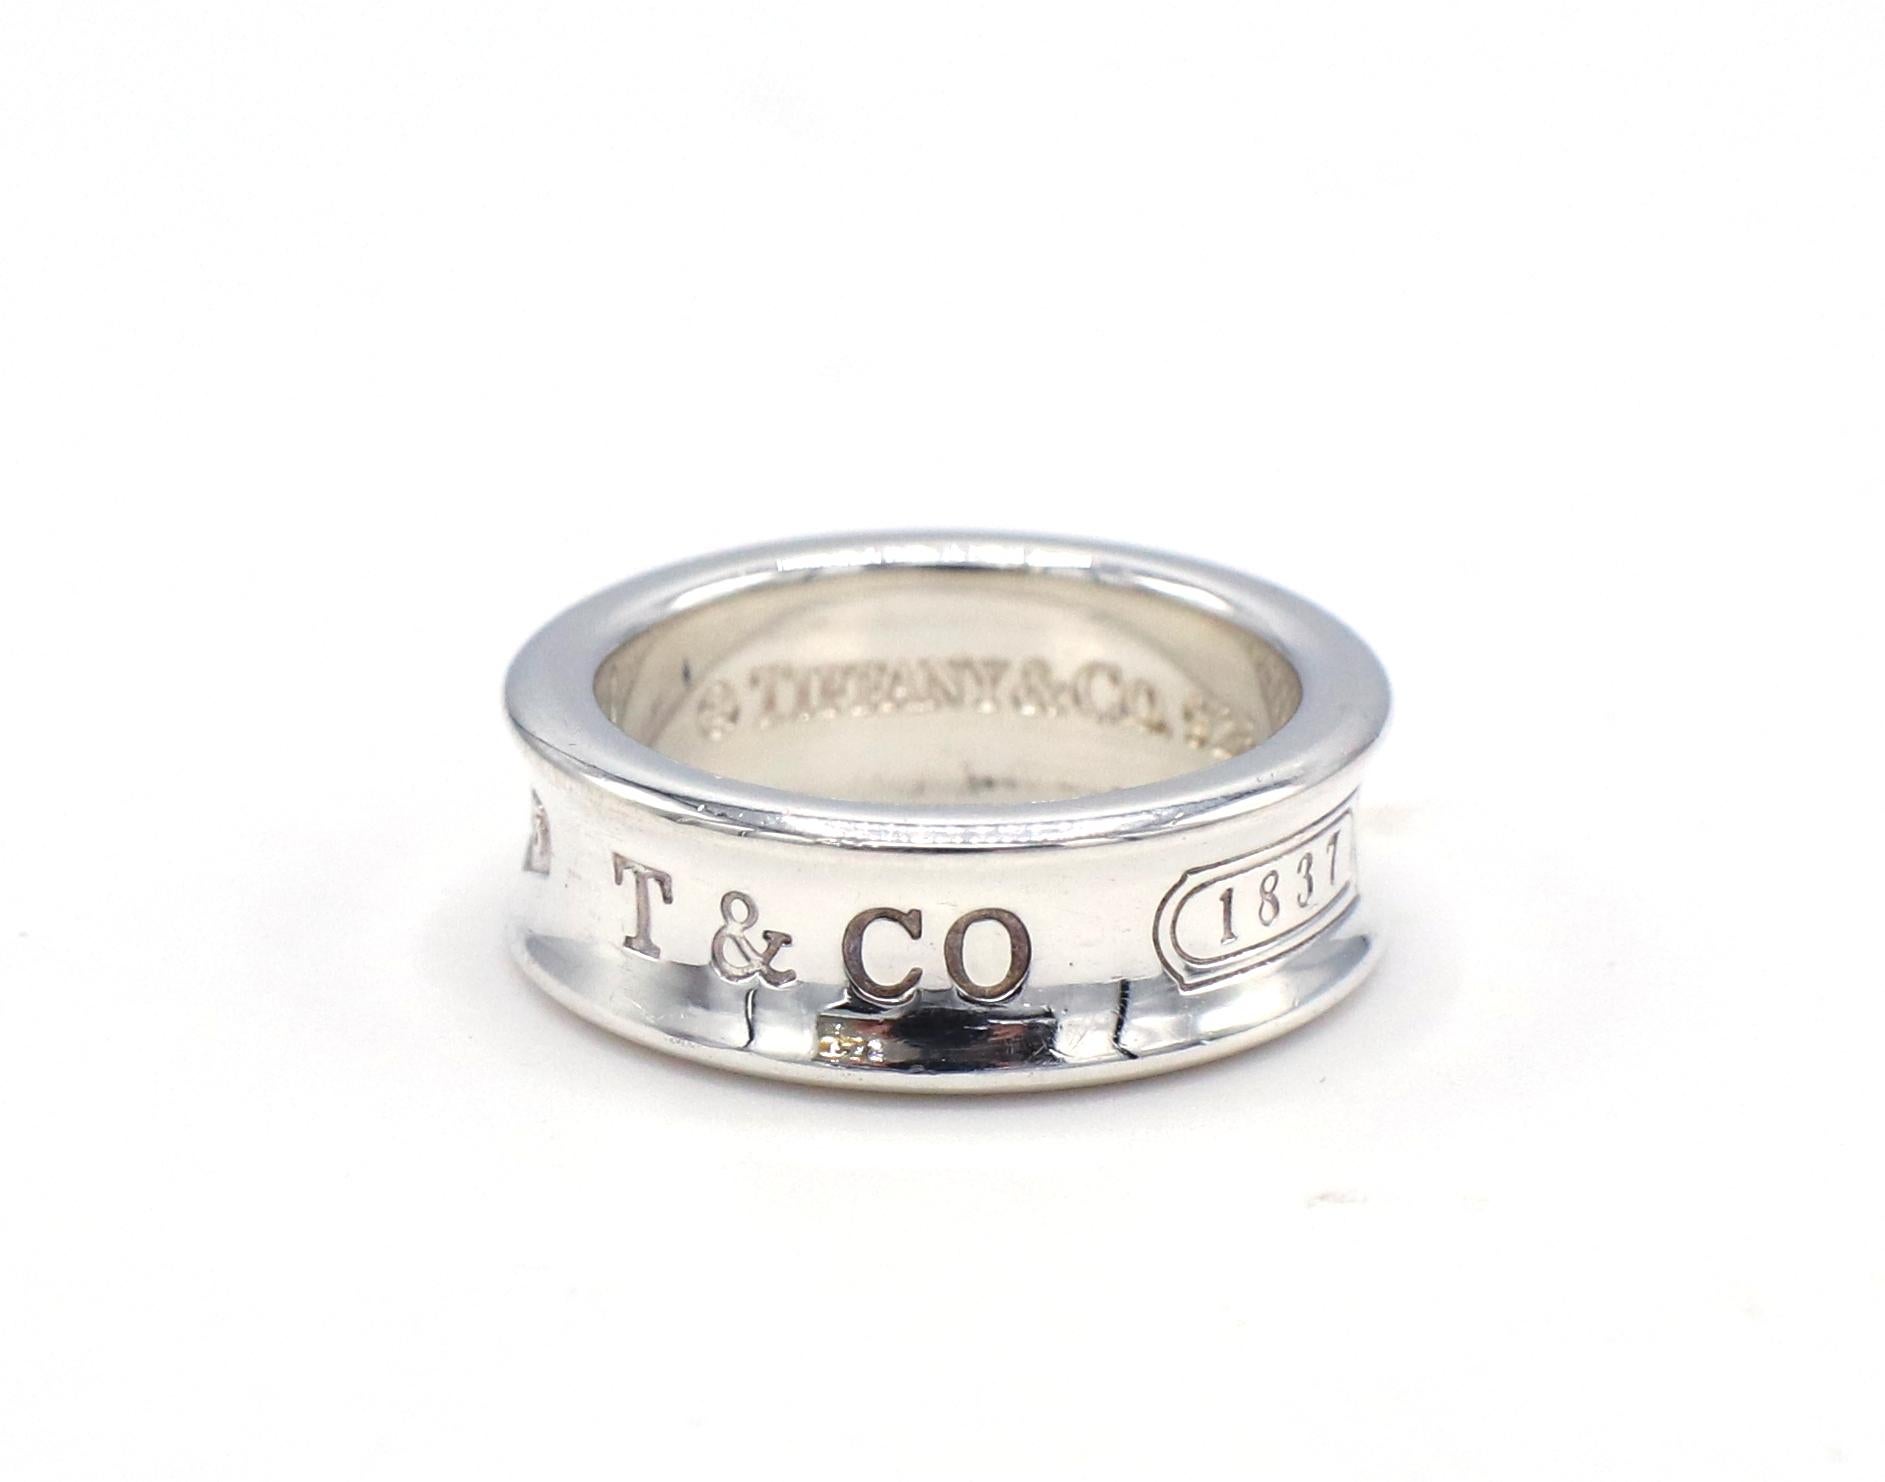 Tiffany & Co. 1837 Sterling Silver Vintage Band Ring 
Metal: Sterling silver
Weight: 7.59 grams
Size: 5.75 (US)
Width: 7mm
Signed: Tiffany & Co. 925 